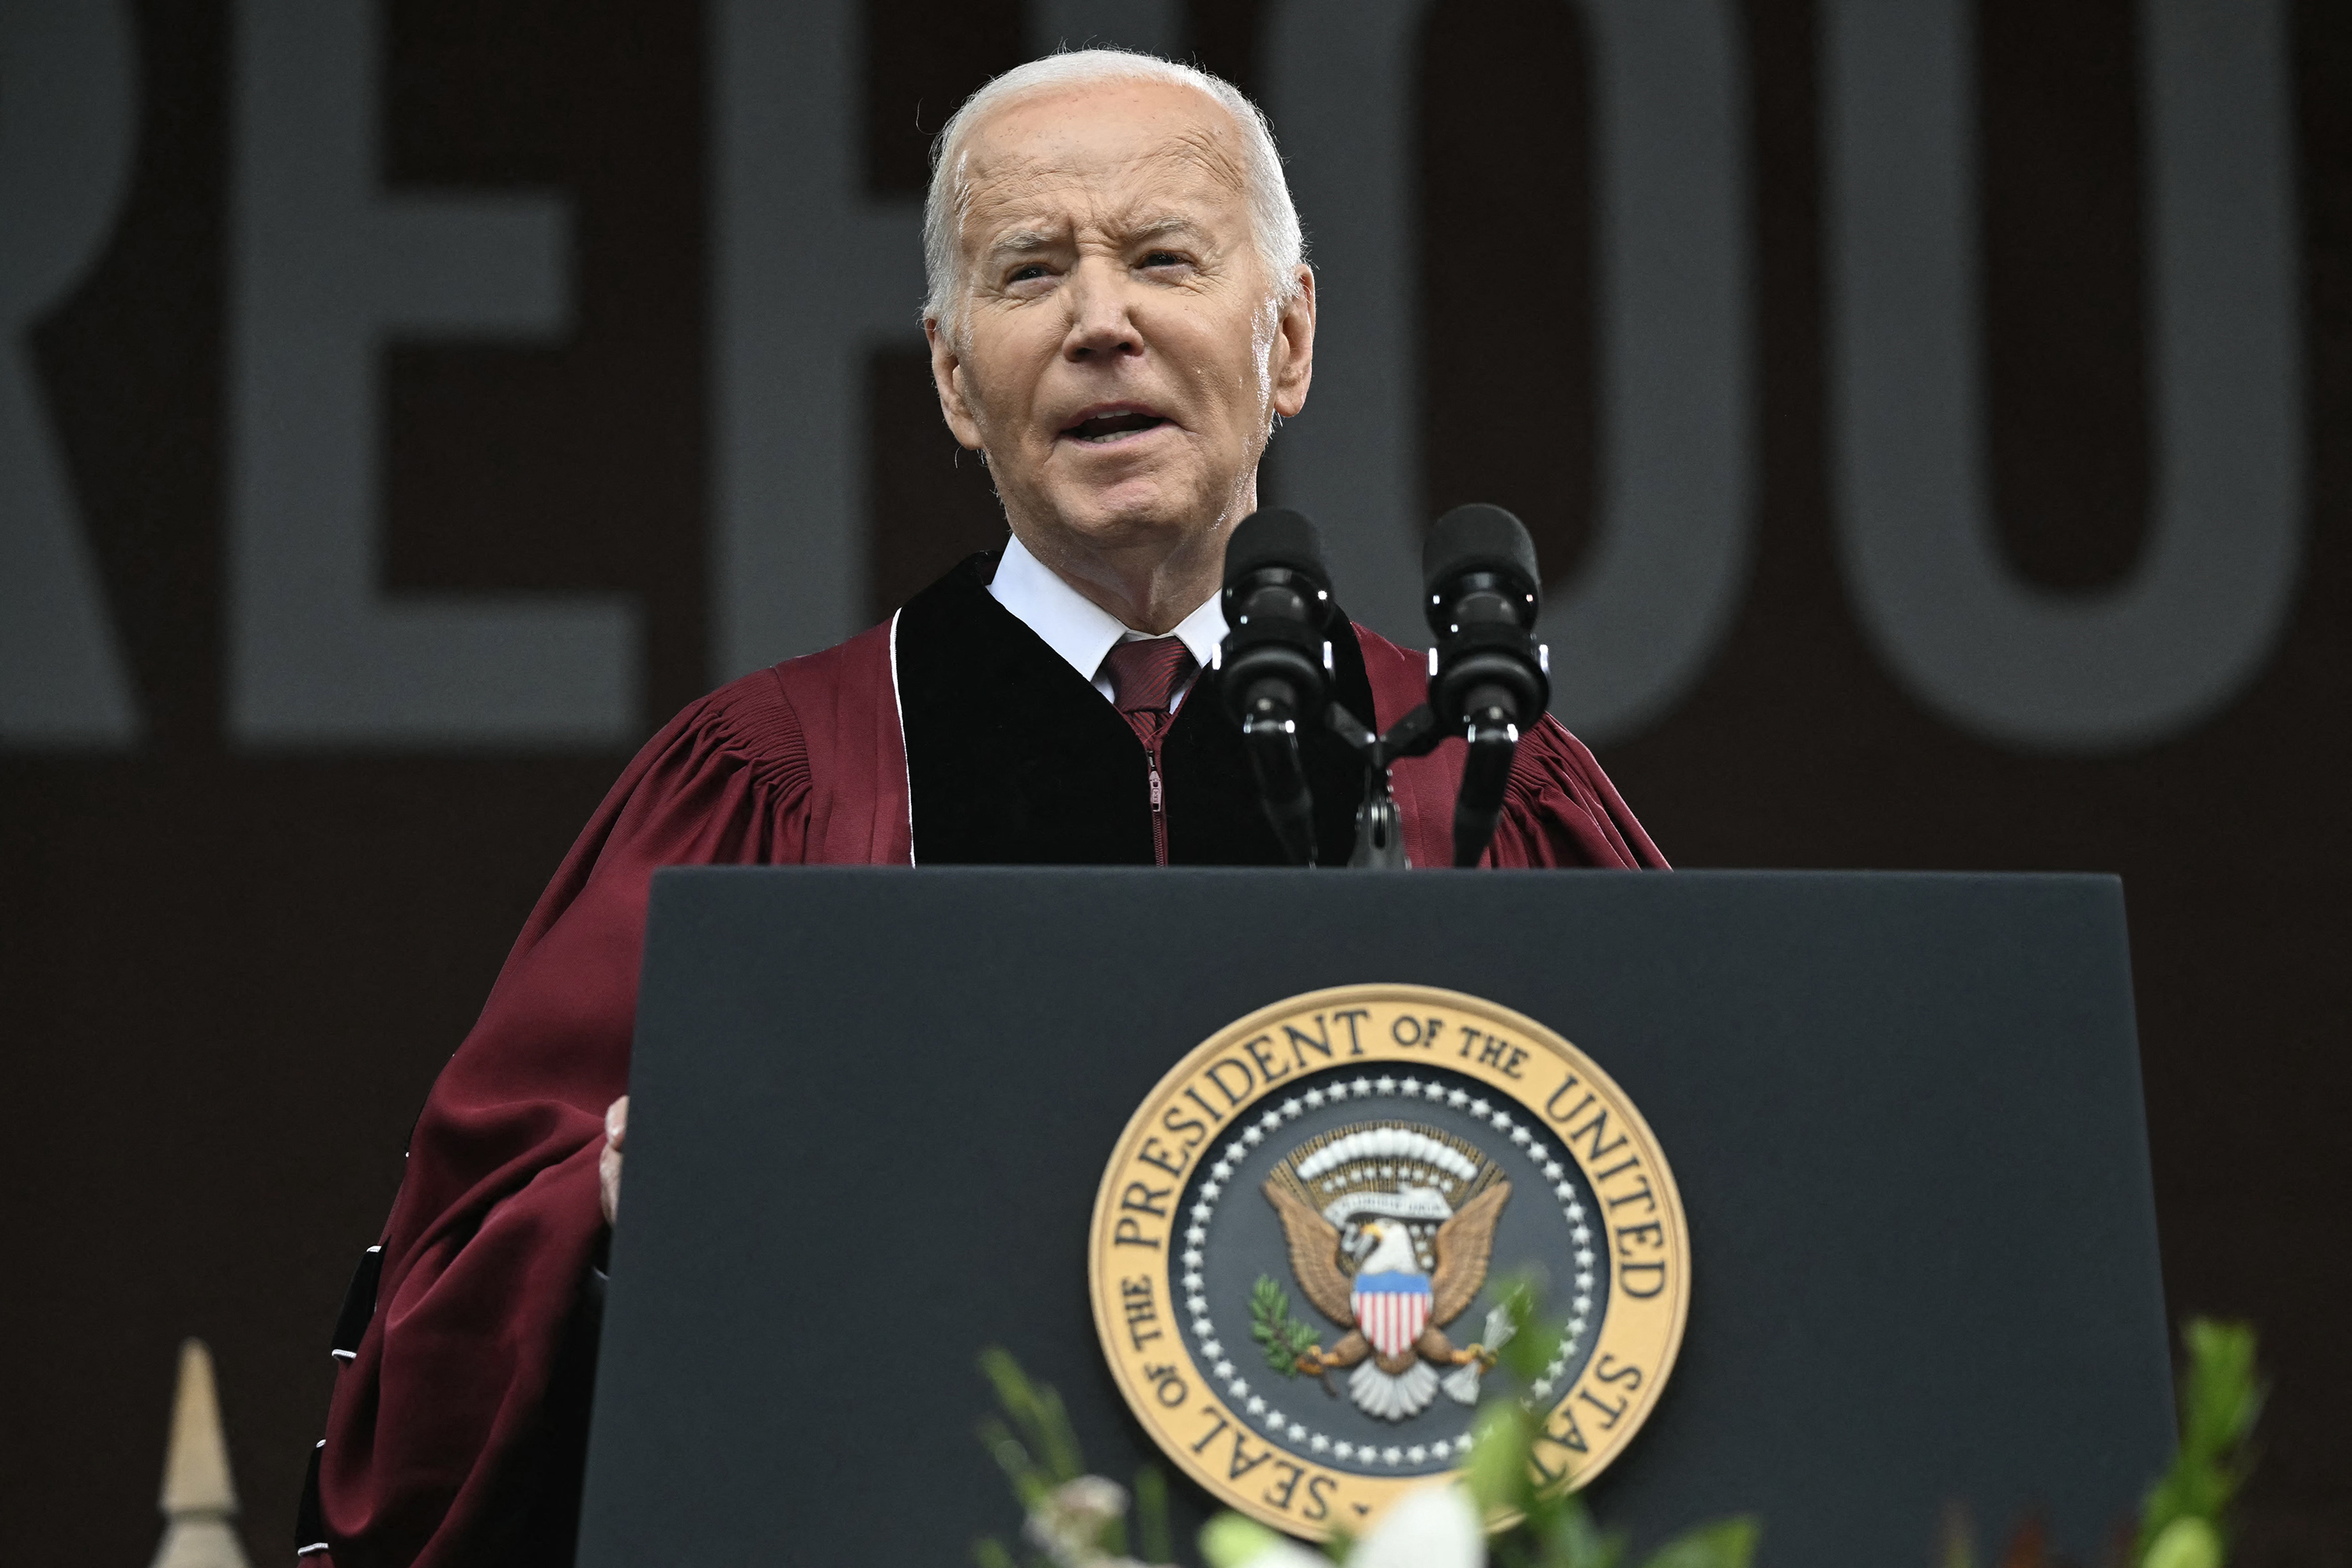 President Joe Biden delivers a commencement address at Morehouse College in Atlanta on May 19.